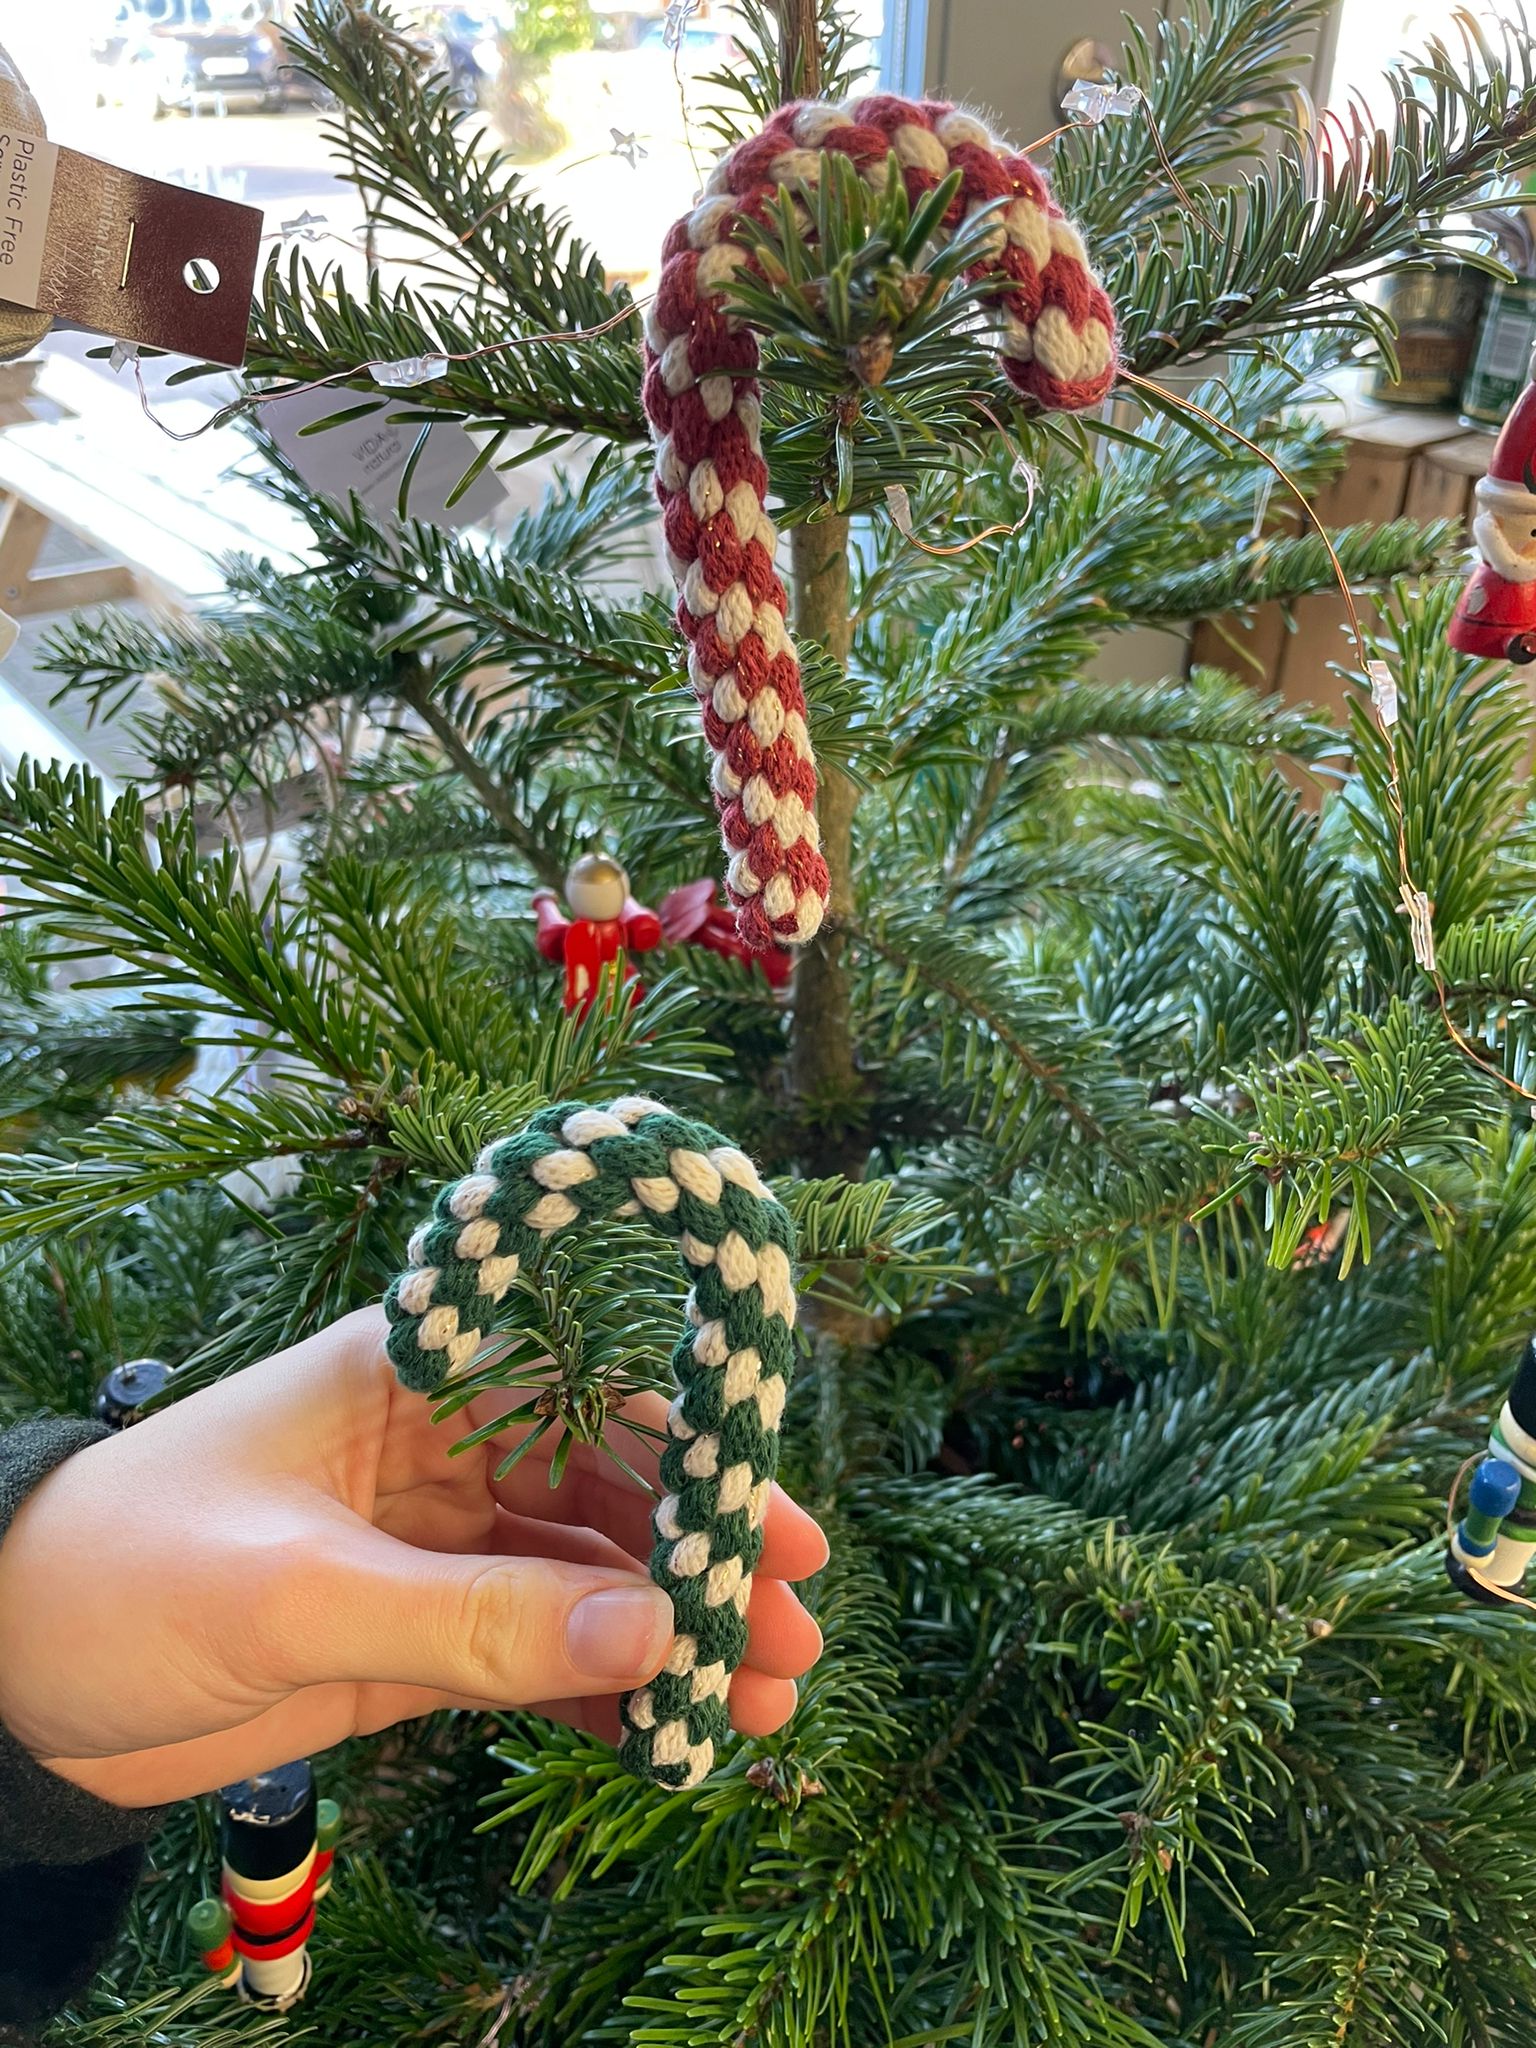 Candy Cane Christmas Tree Ornament